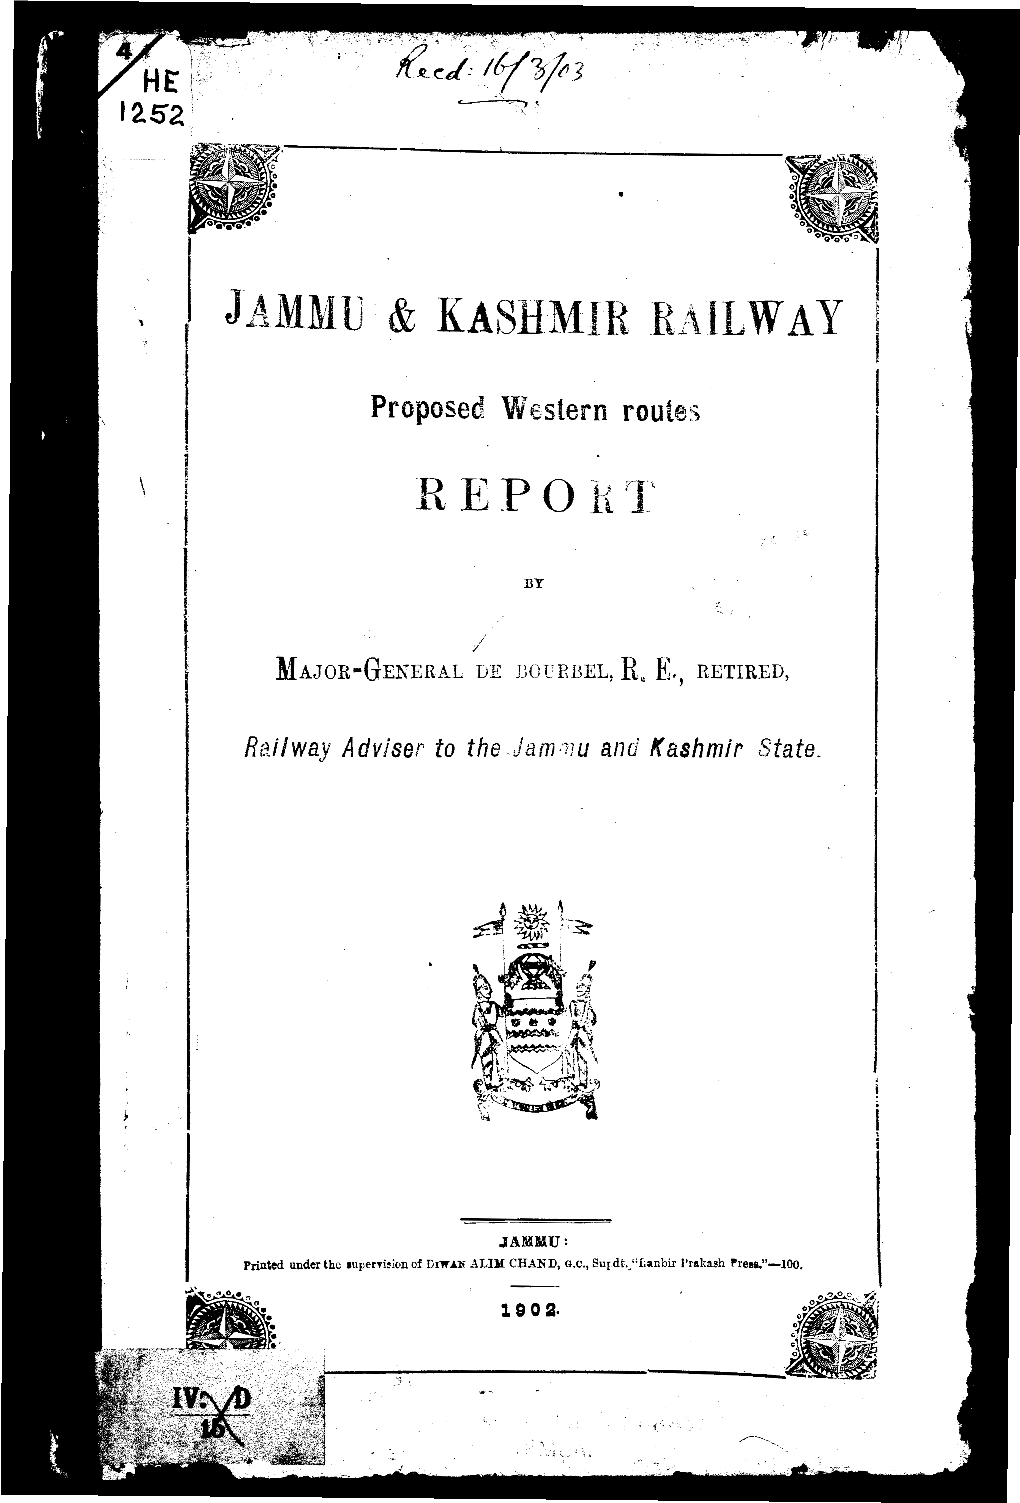 Jammu & Kashmir Railway Proposed Western Routes, Report